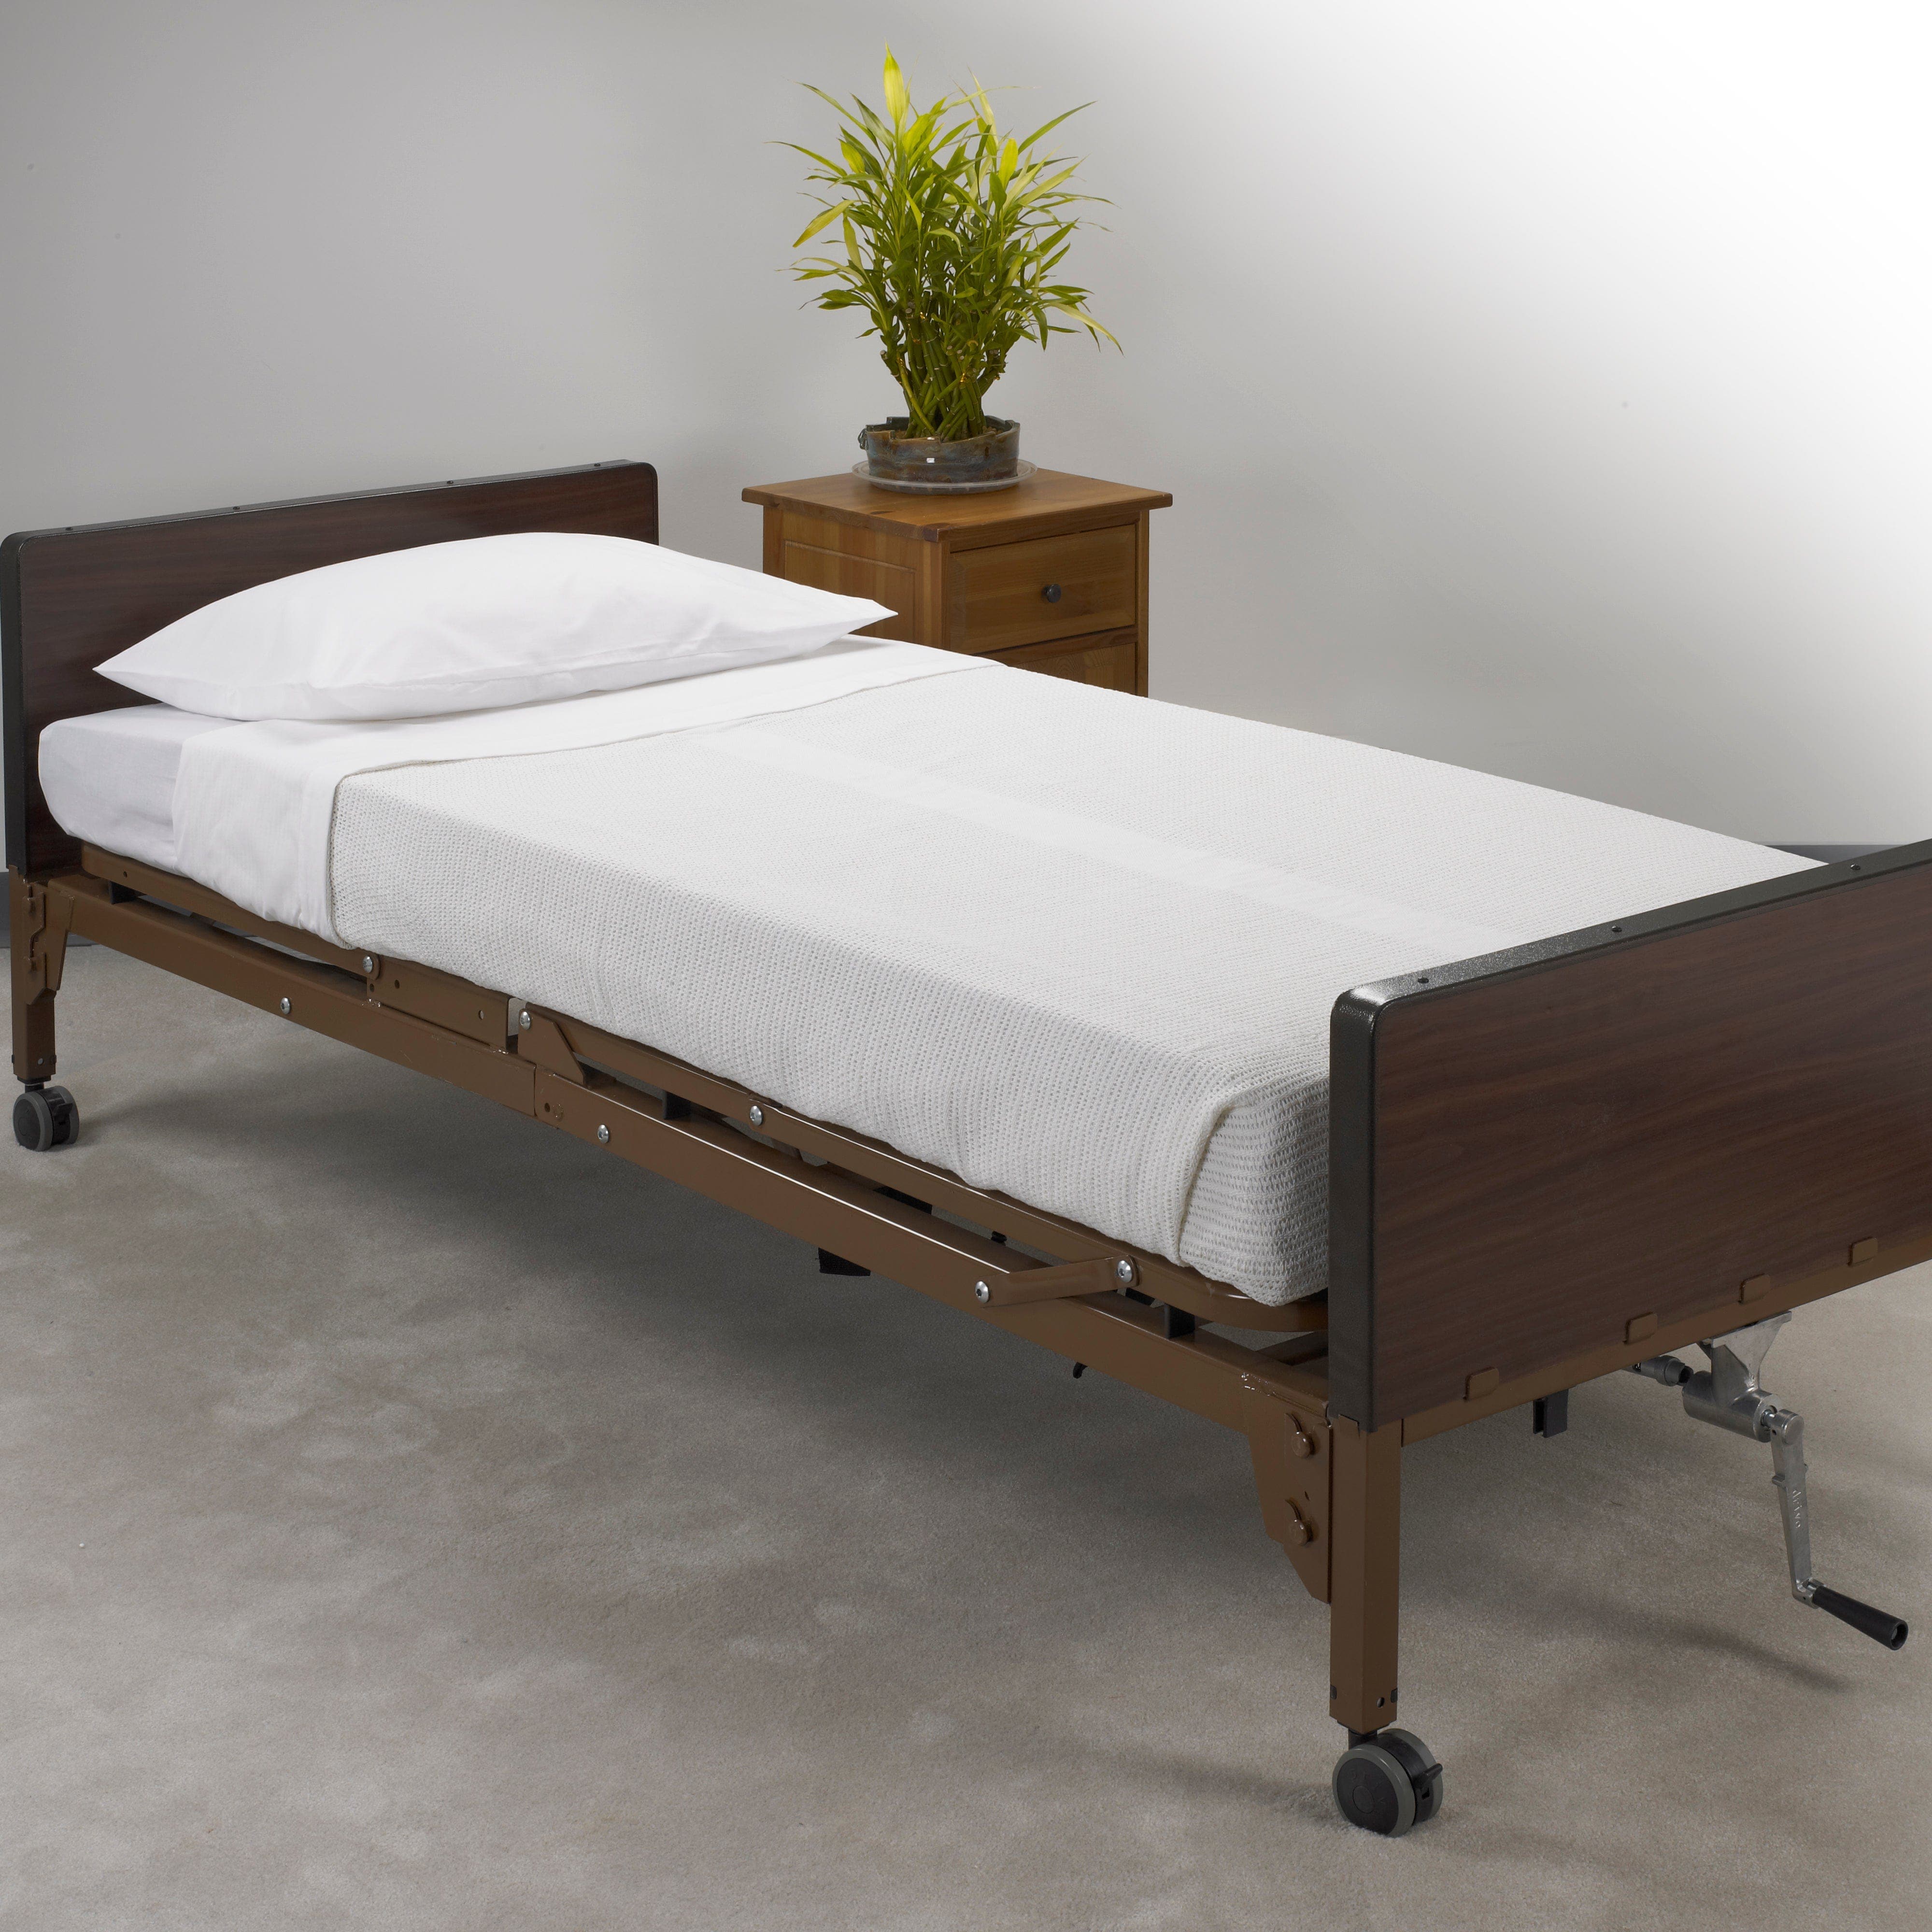 Drive Medical Hospital Beds Drive Medical Hospital Bed Bedding in a Box